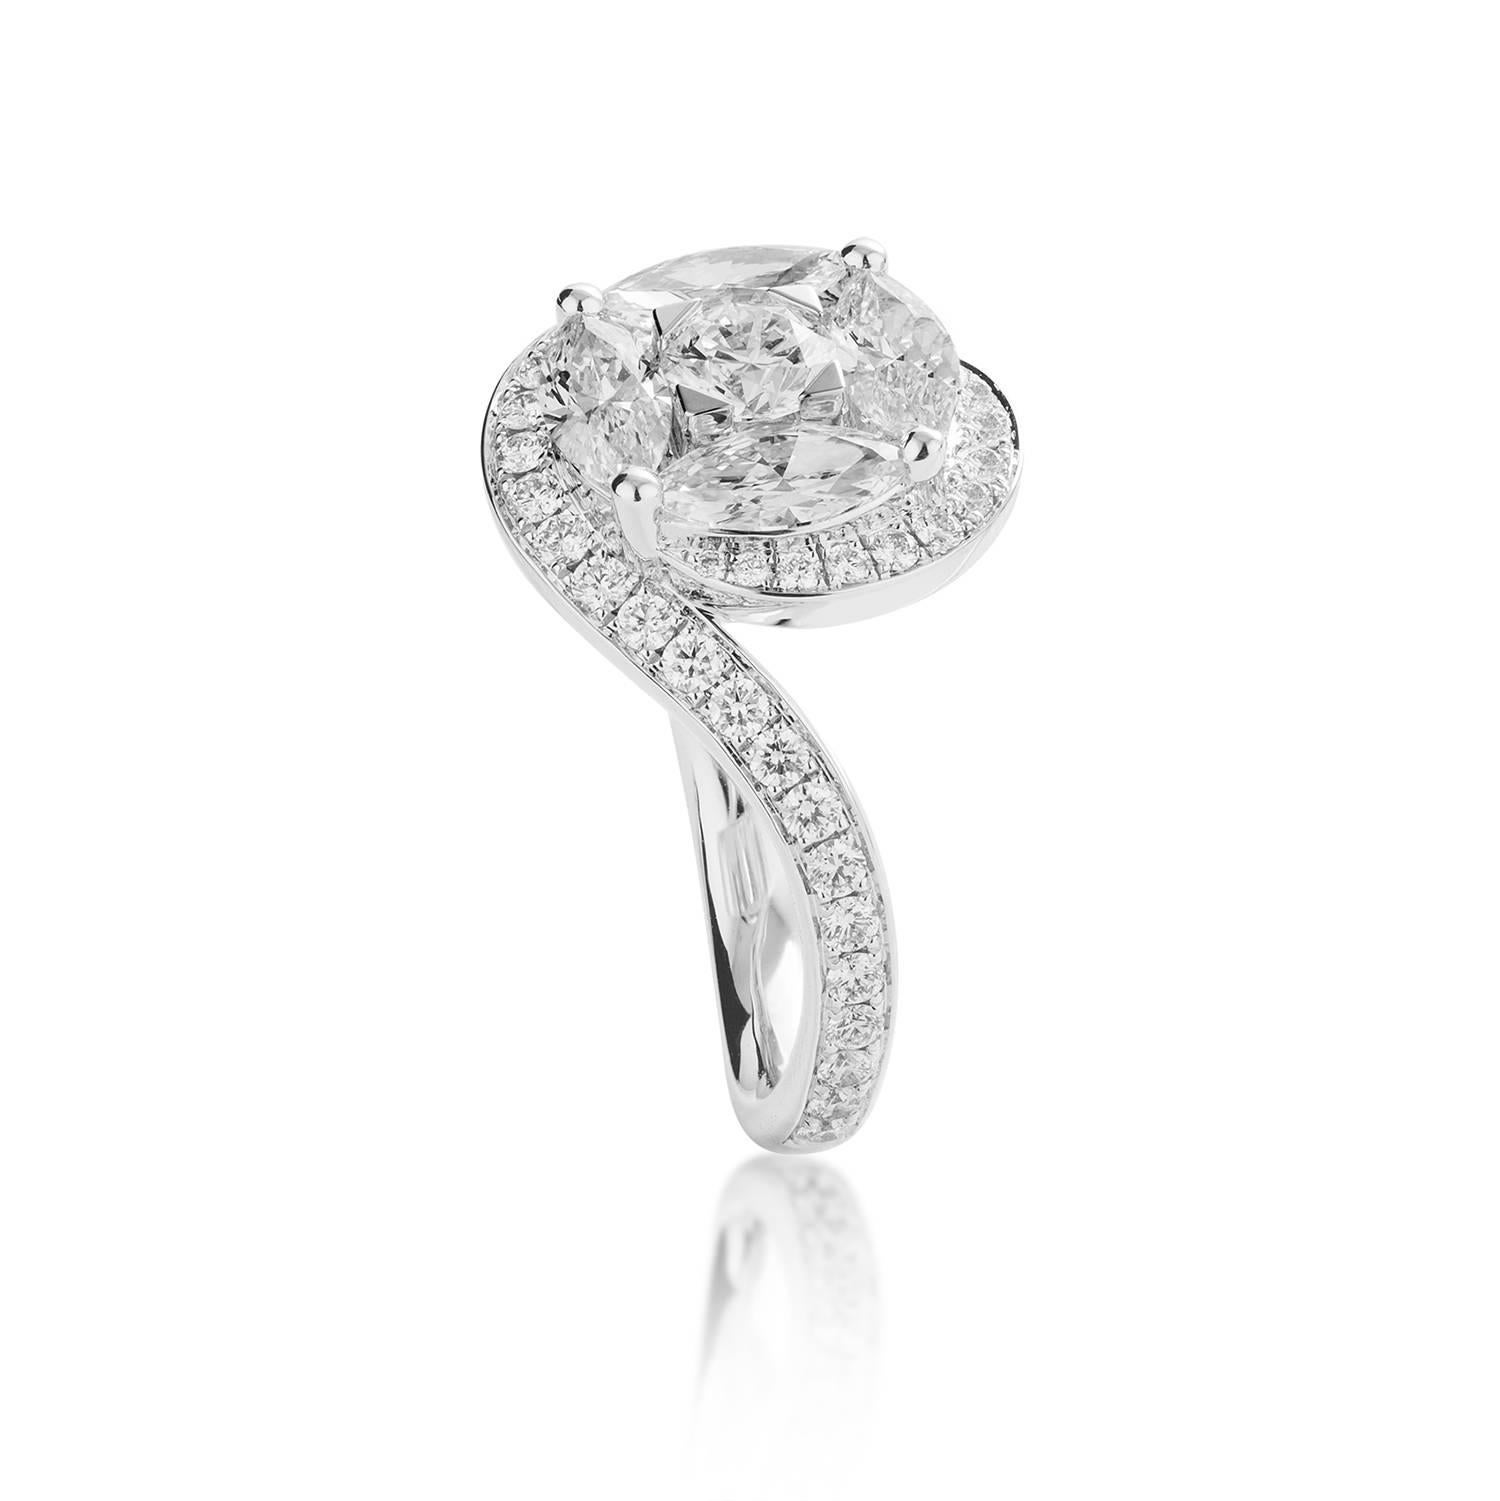 Marquise cut diamonds (0.98ct) and a round brilliant cut diamond (0.32ct) are cleverly set to give the illusion of one large diamond.  Surrounded by brilliant cut diamonds on the face of the ring and 3/4s of the band, with a total carat weight of